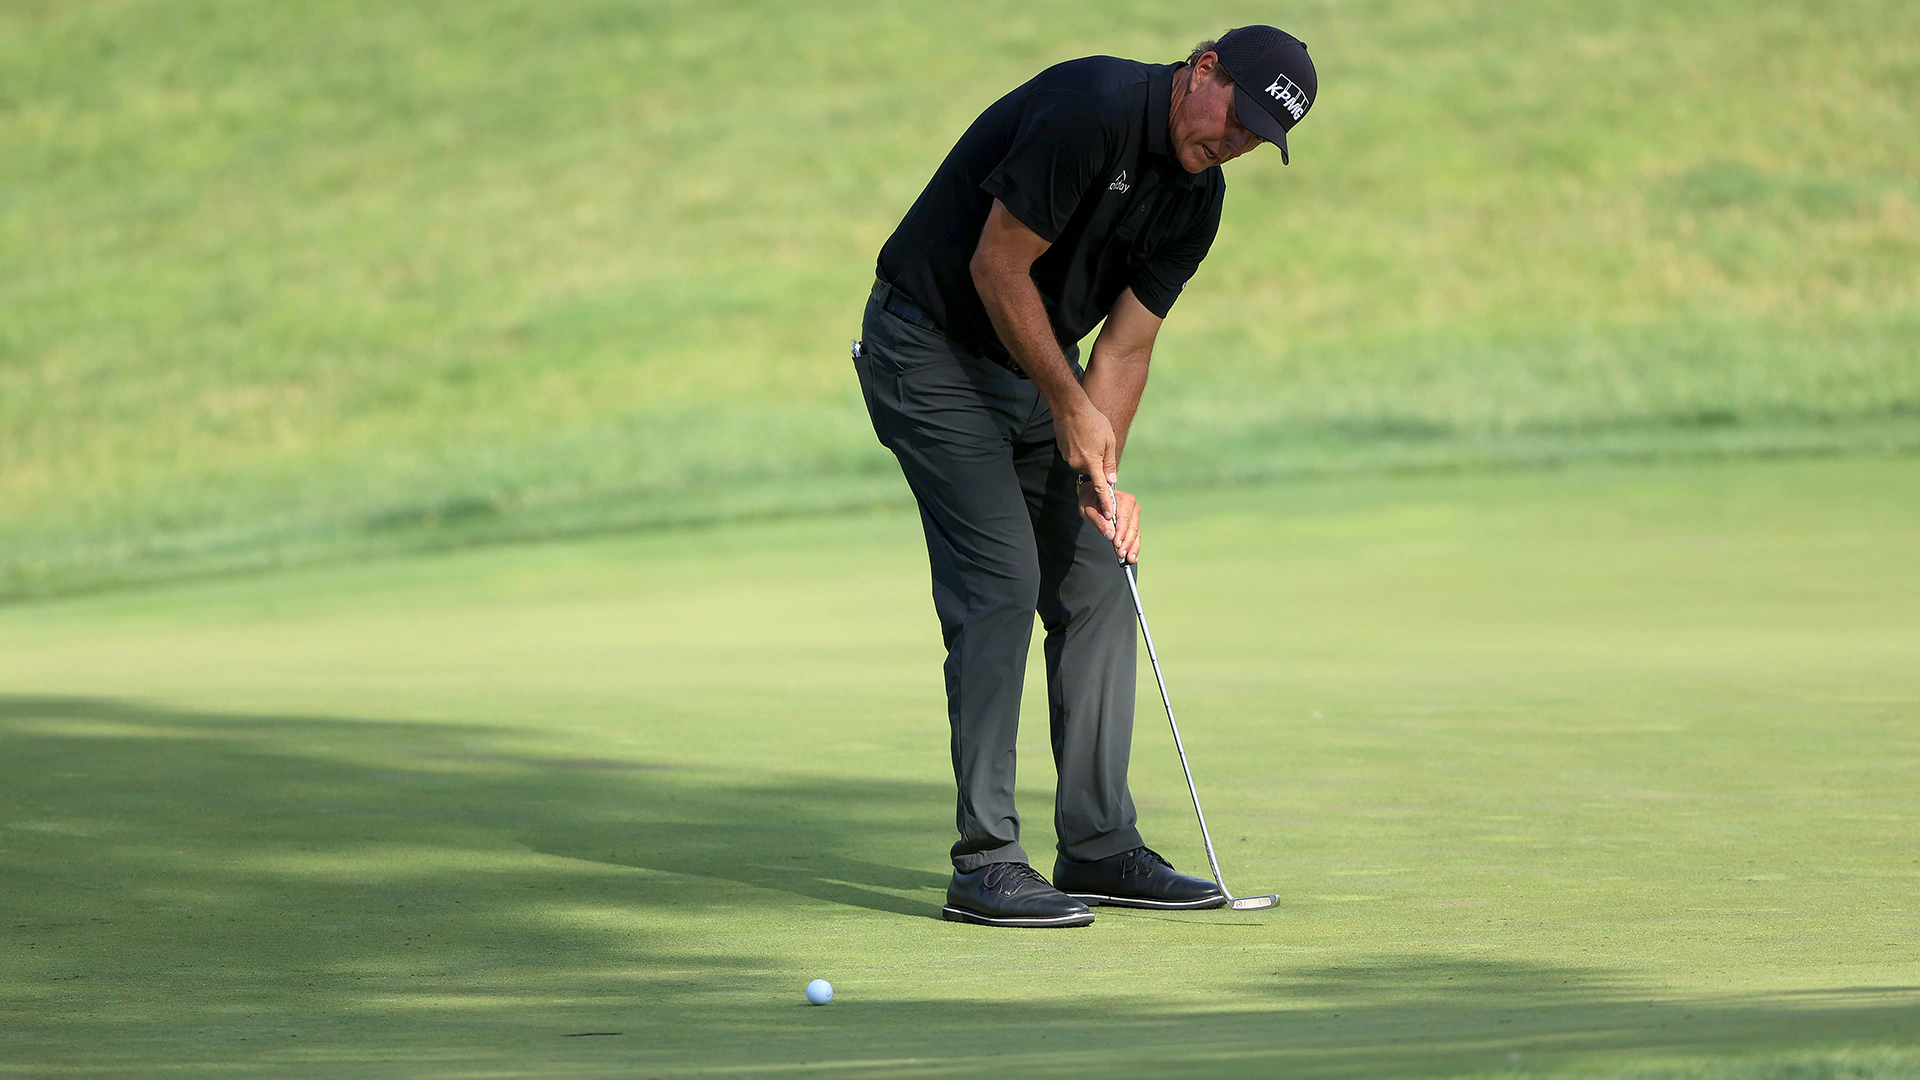 Watch: Phil Mickelson makes par after putting from 78 yards out in fairway